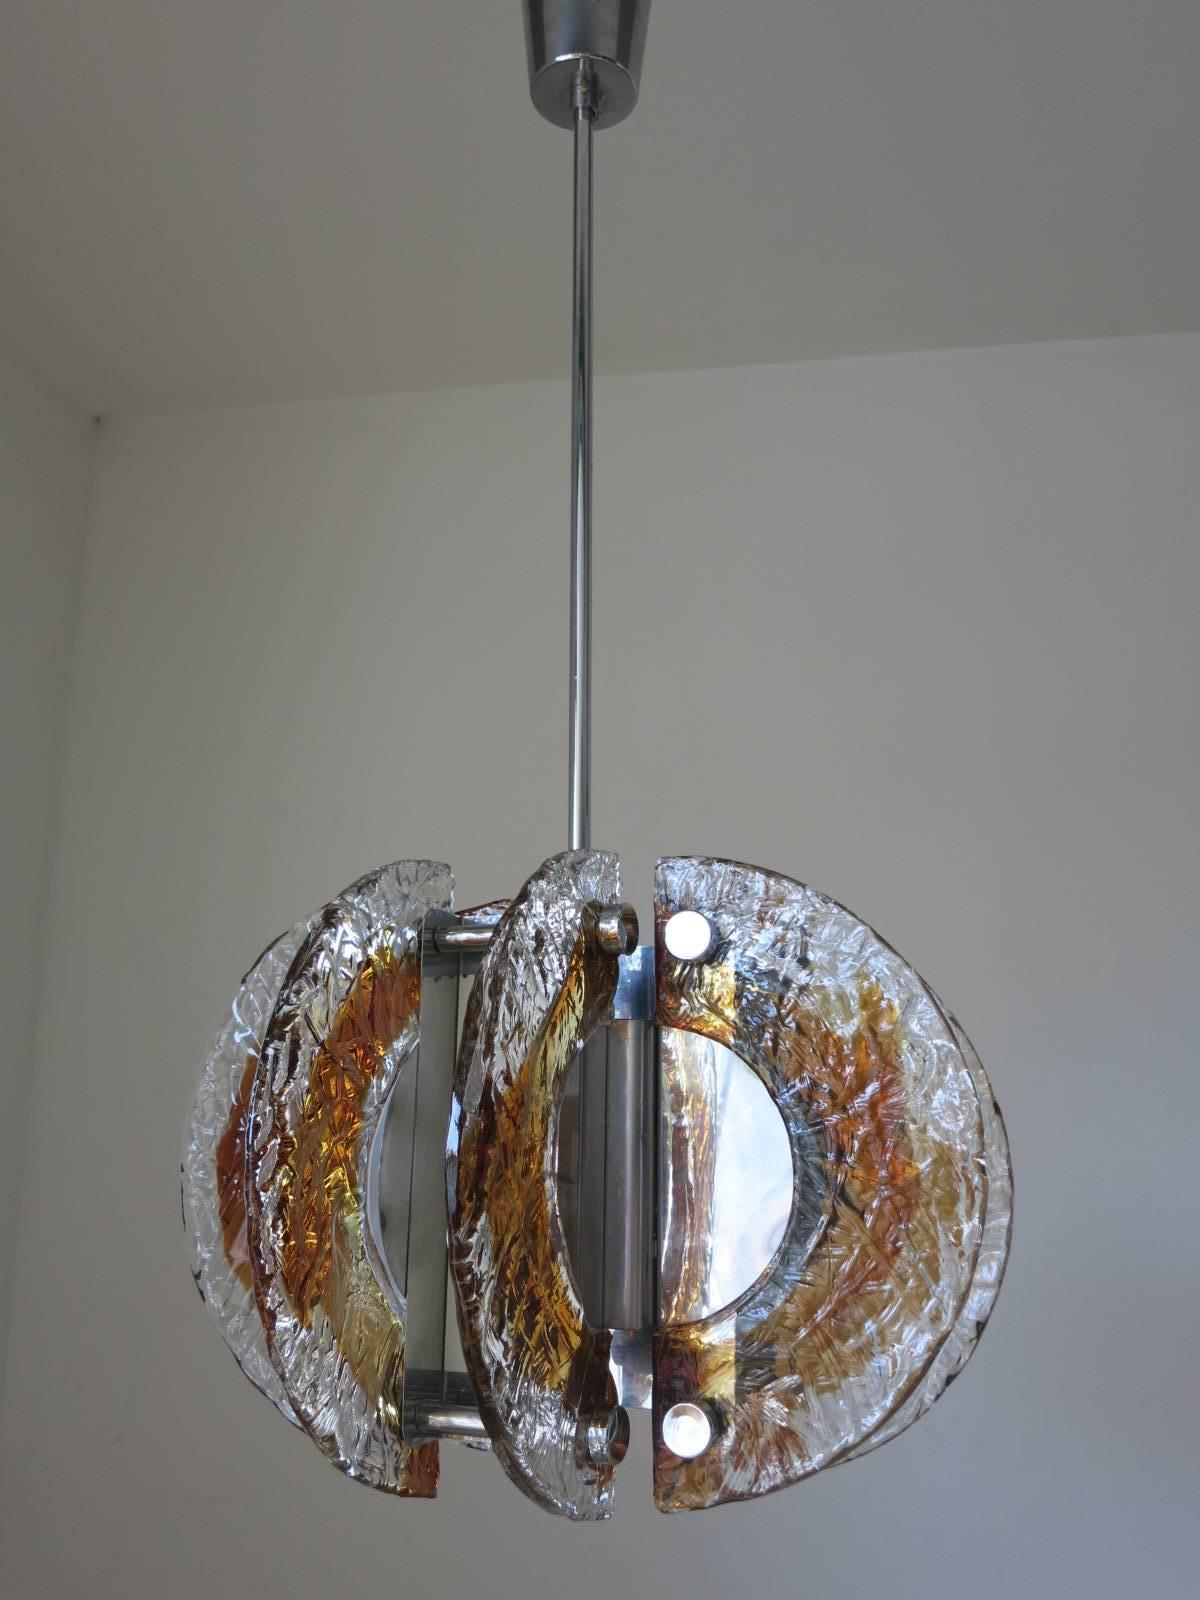 Vintage Italian pendant with clear and amber Murano glasses hand blown into half moon shapes, mounted on chrome frame / Designed by Mazzega circa 1960’s / Made in Italy
8 lights E12 or E14 type / max 40W each
Diameter: 17 inches / Height: 36 inches